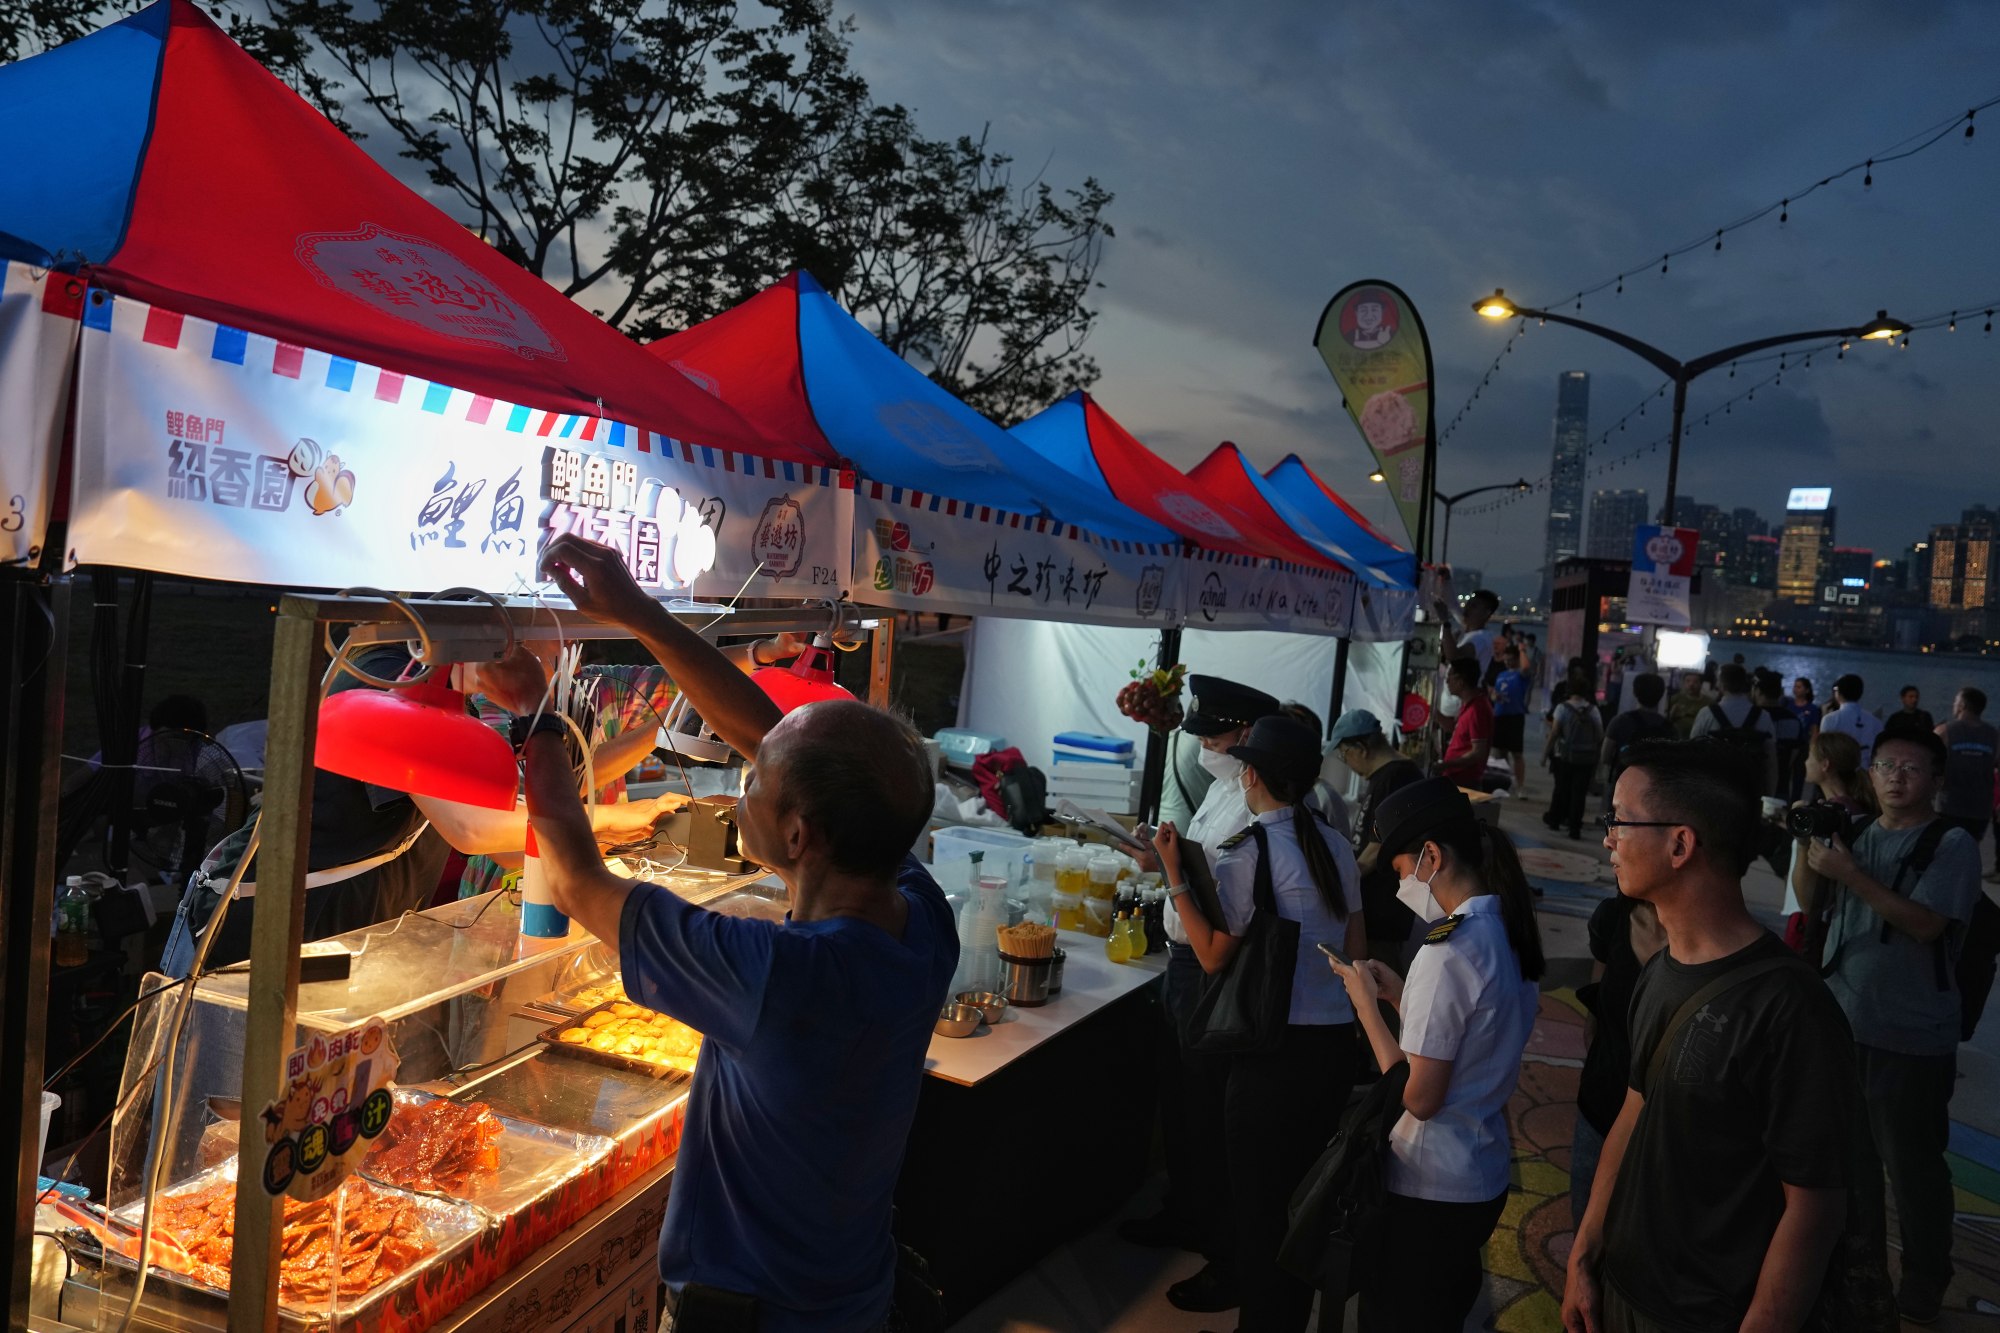 Food stalls get ready for business at one of the night events designed to boost the after-dark economy. Photo: Elson LI